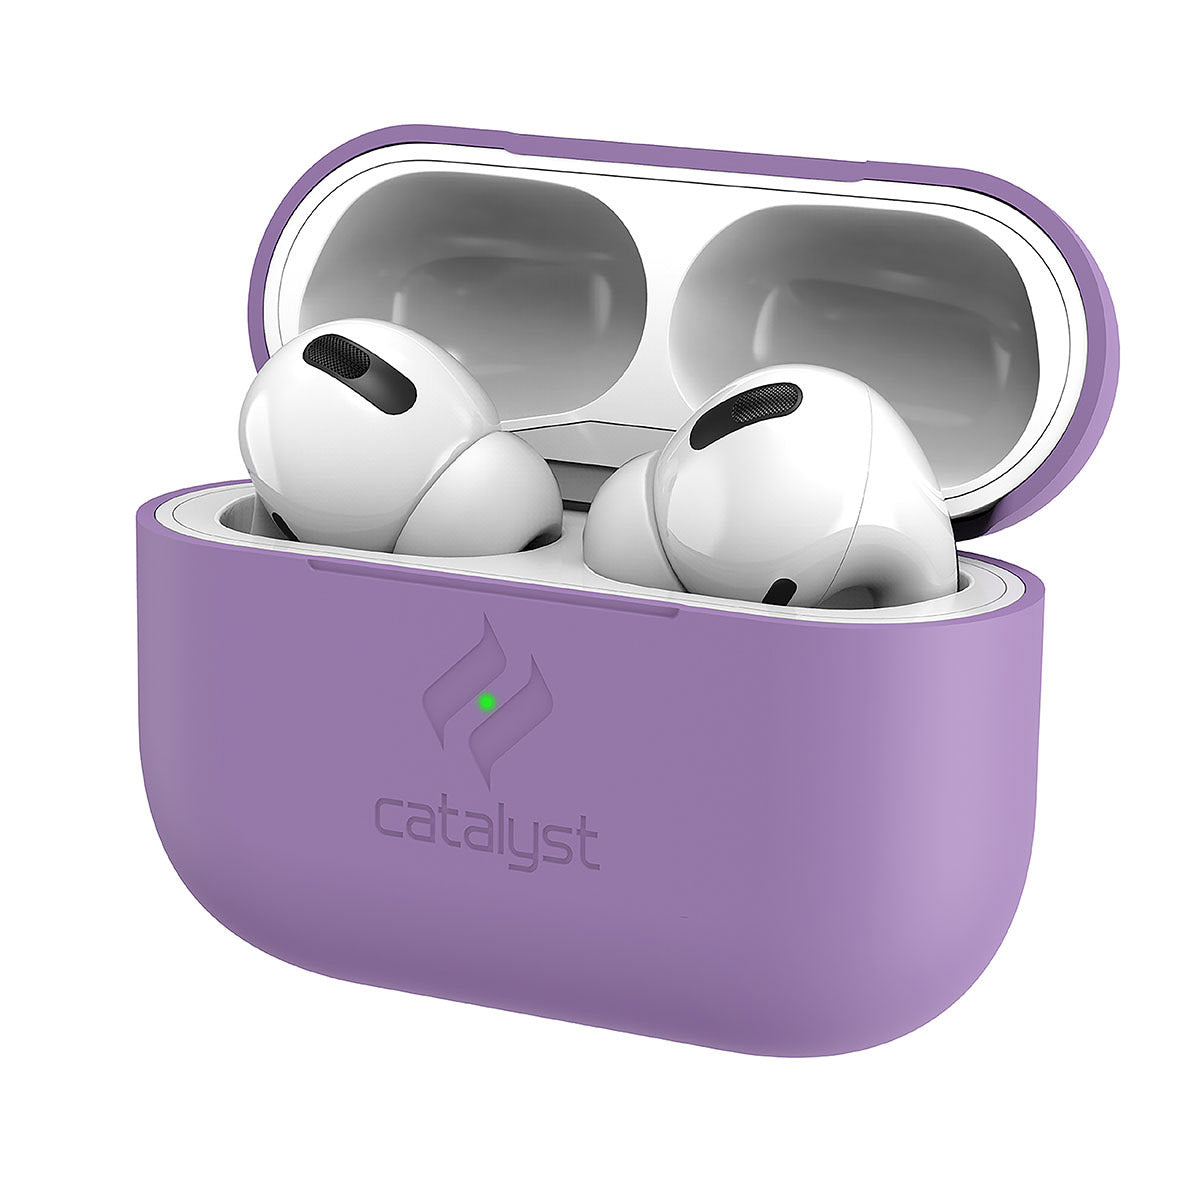 Catalyst airpods pro gen 2/1 slim case showing a closer look of front view of the case in lilac colorway